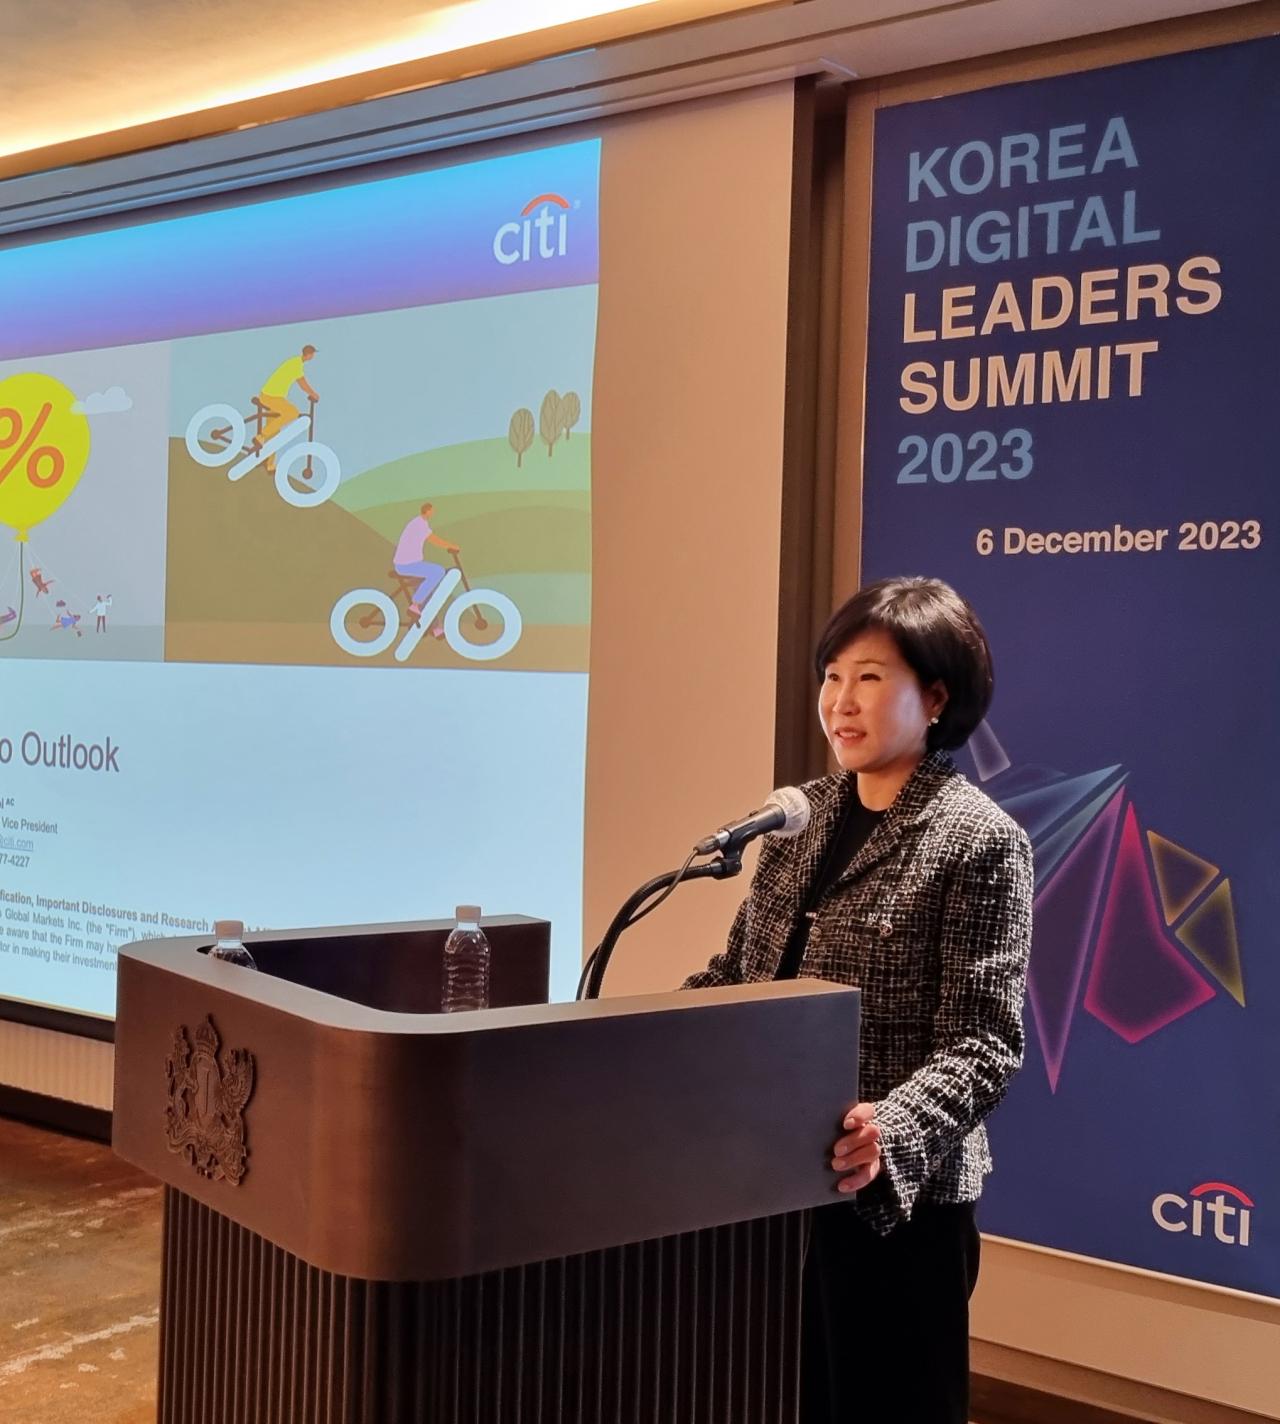 Citibank Korea CEO Yoo Myung-soon delivers a welcoming speech during the Korea Digital Leaders Summit 2023 held at a hotel in Seoul, Wednesday. (Citibank Korea)